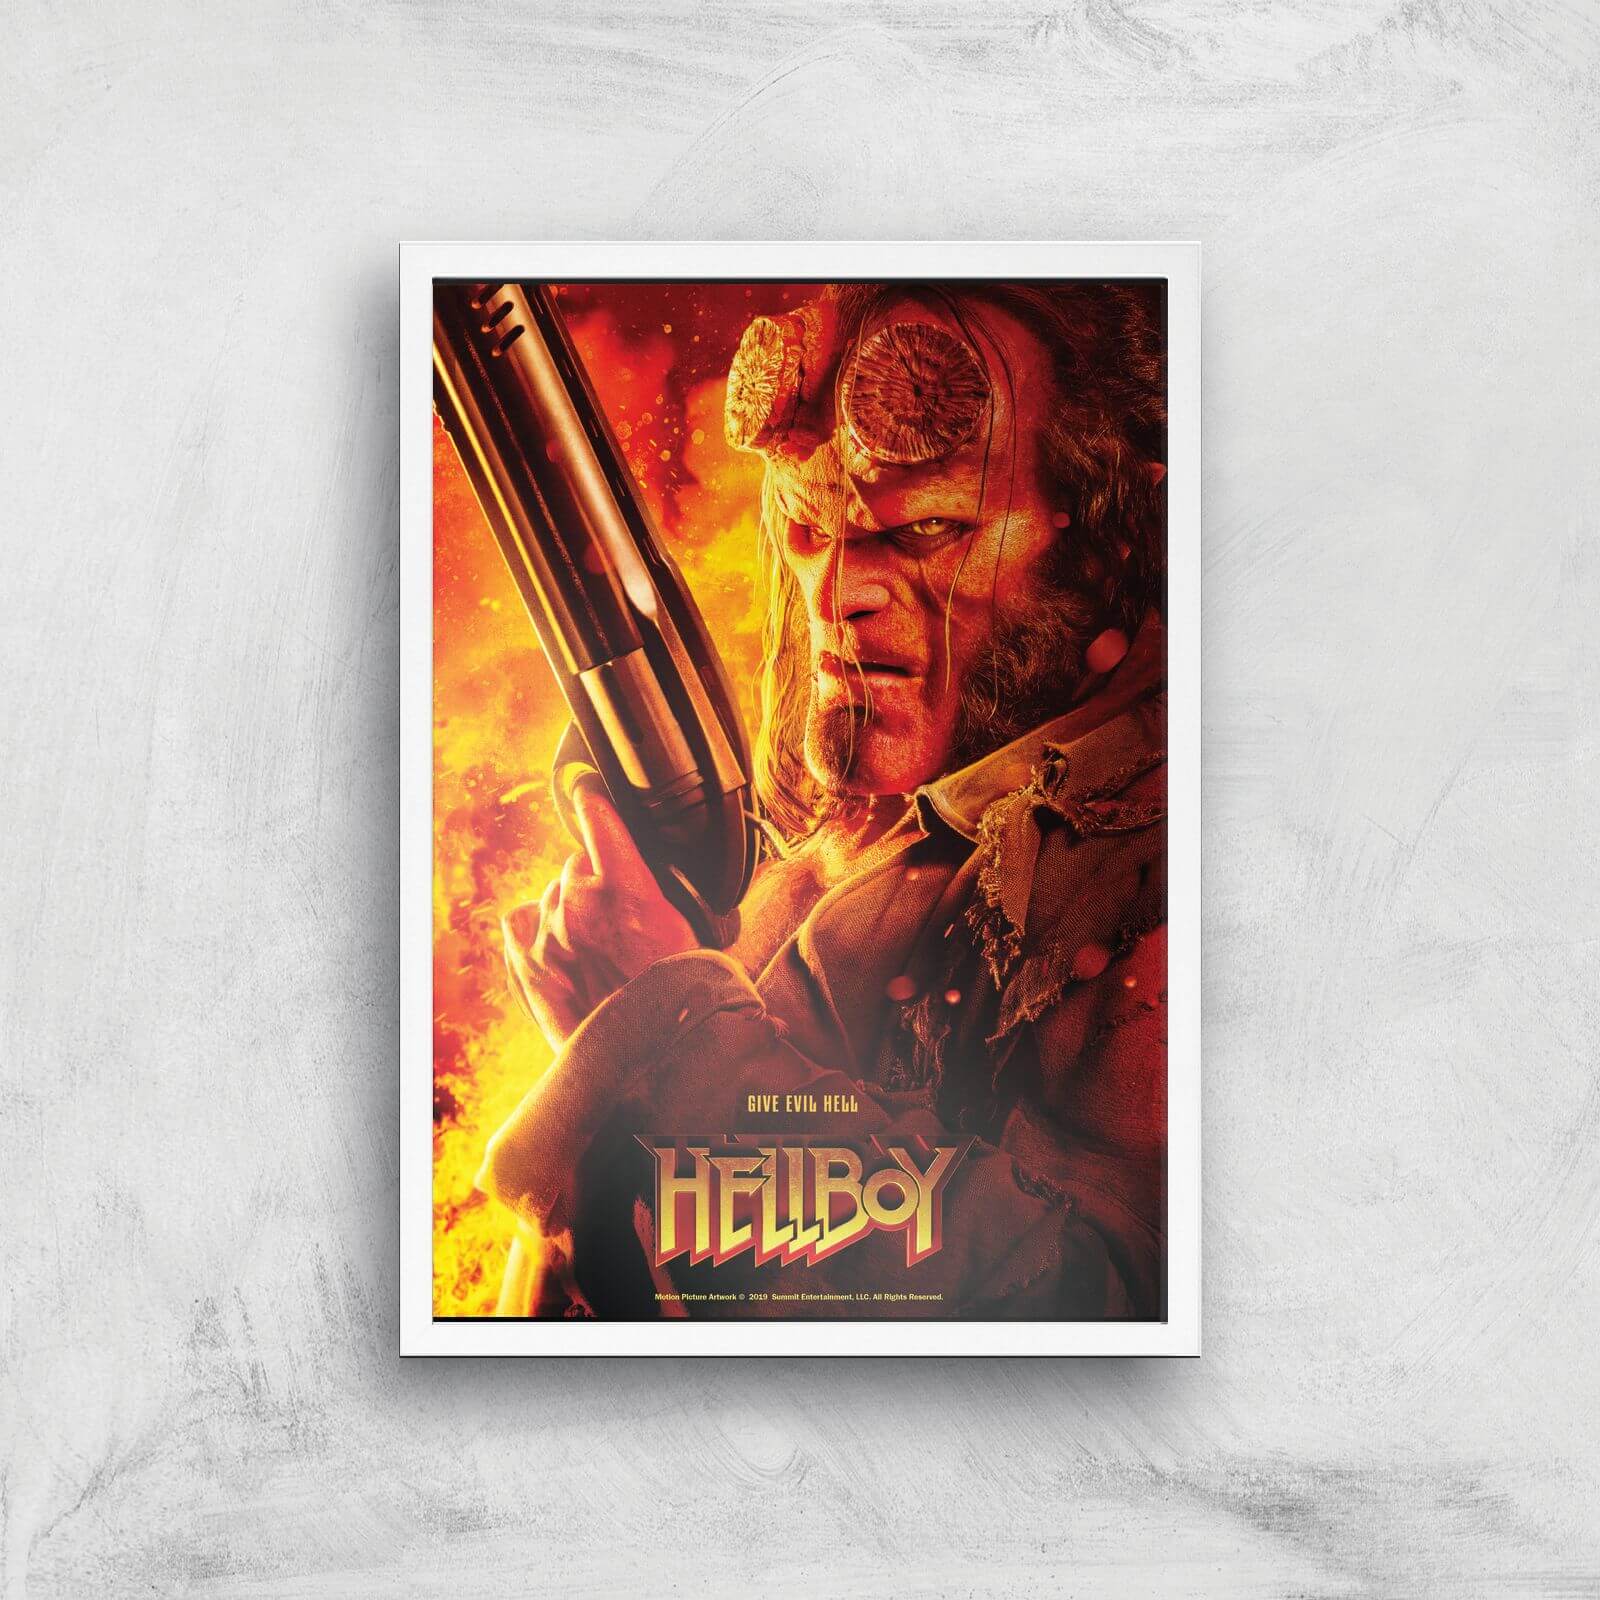 Hellboy Give Evil Hell Art Print - A2 - White Frame